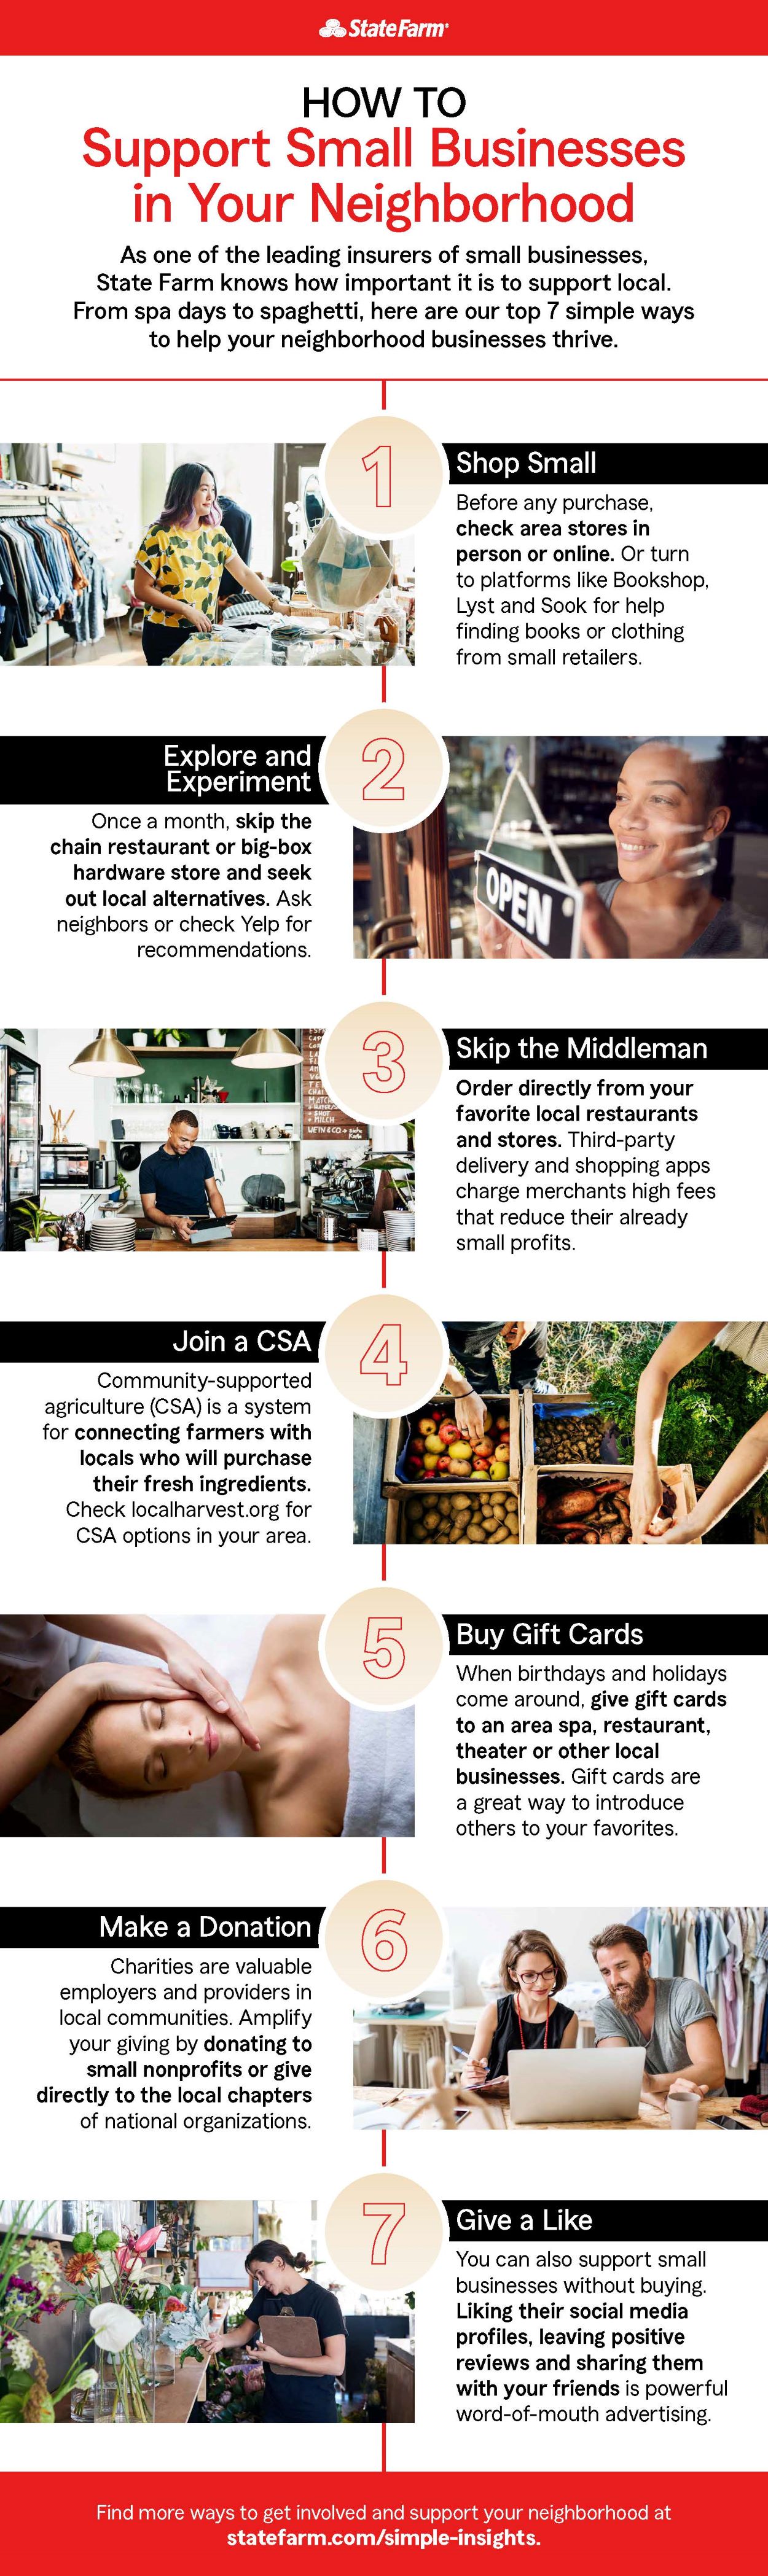 Infographic that shares various ways to support small businesses in your neighborhood.